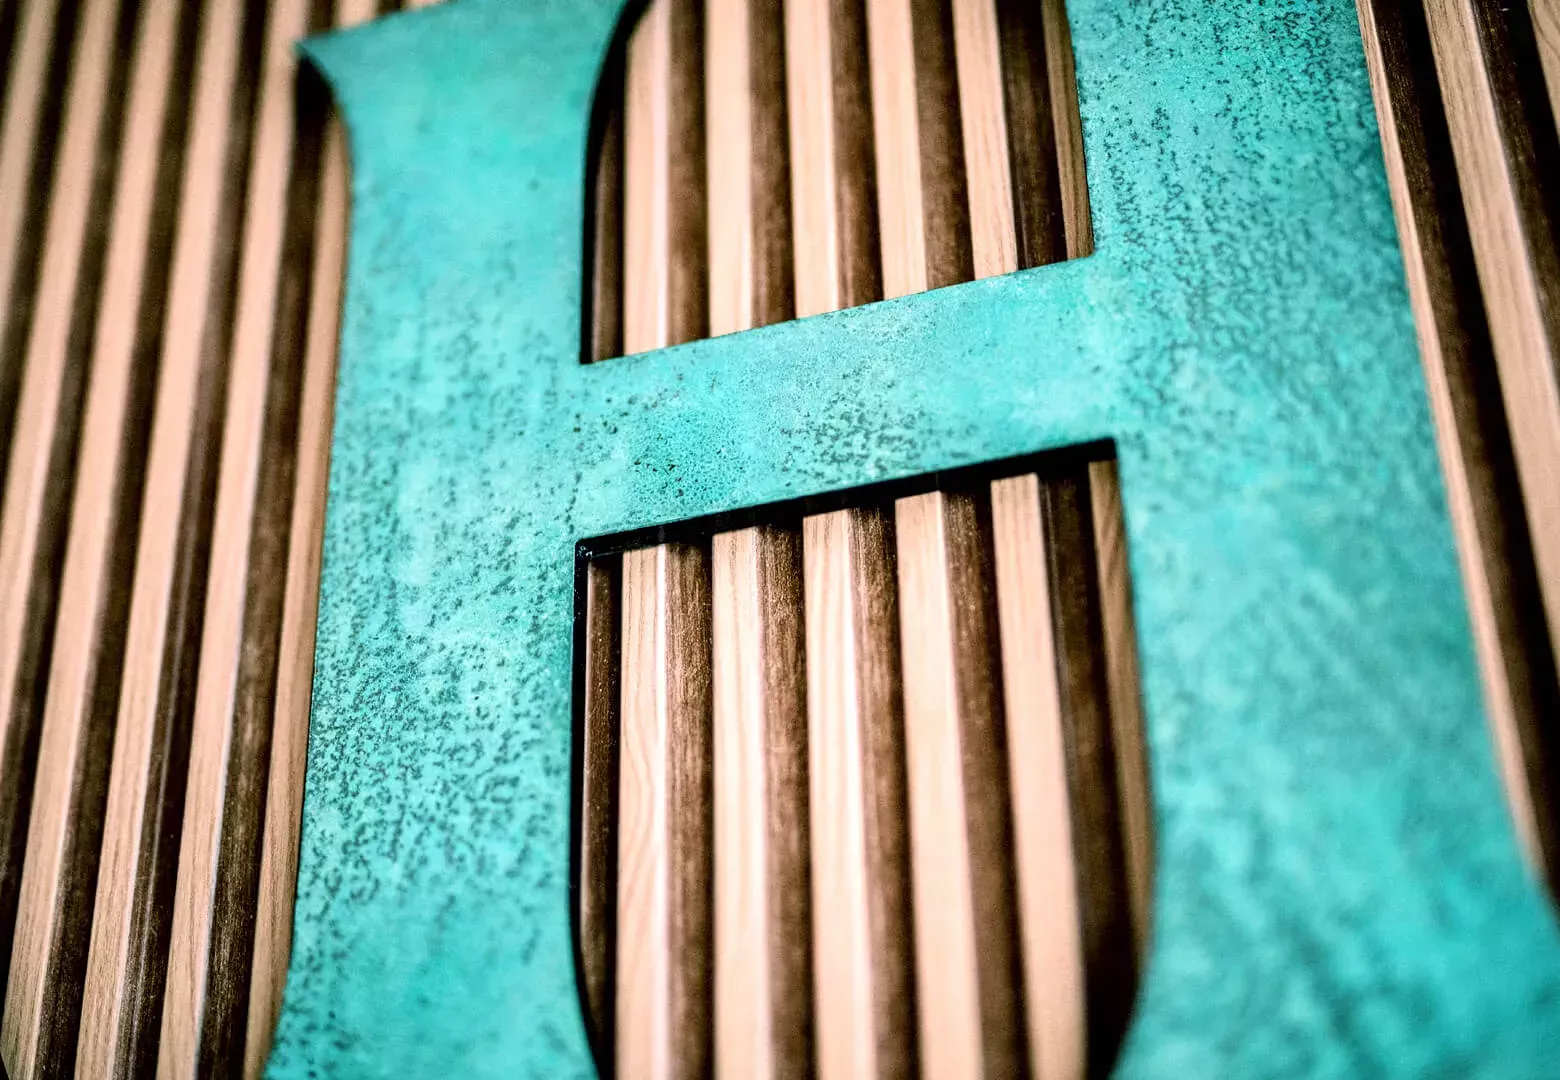 Letter H - made of metal in industrial style, covered with patina